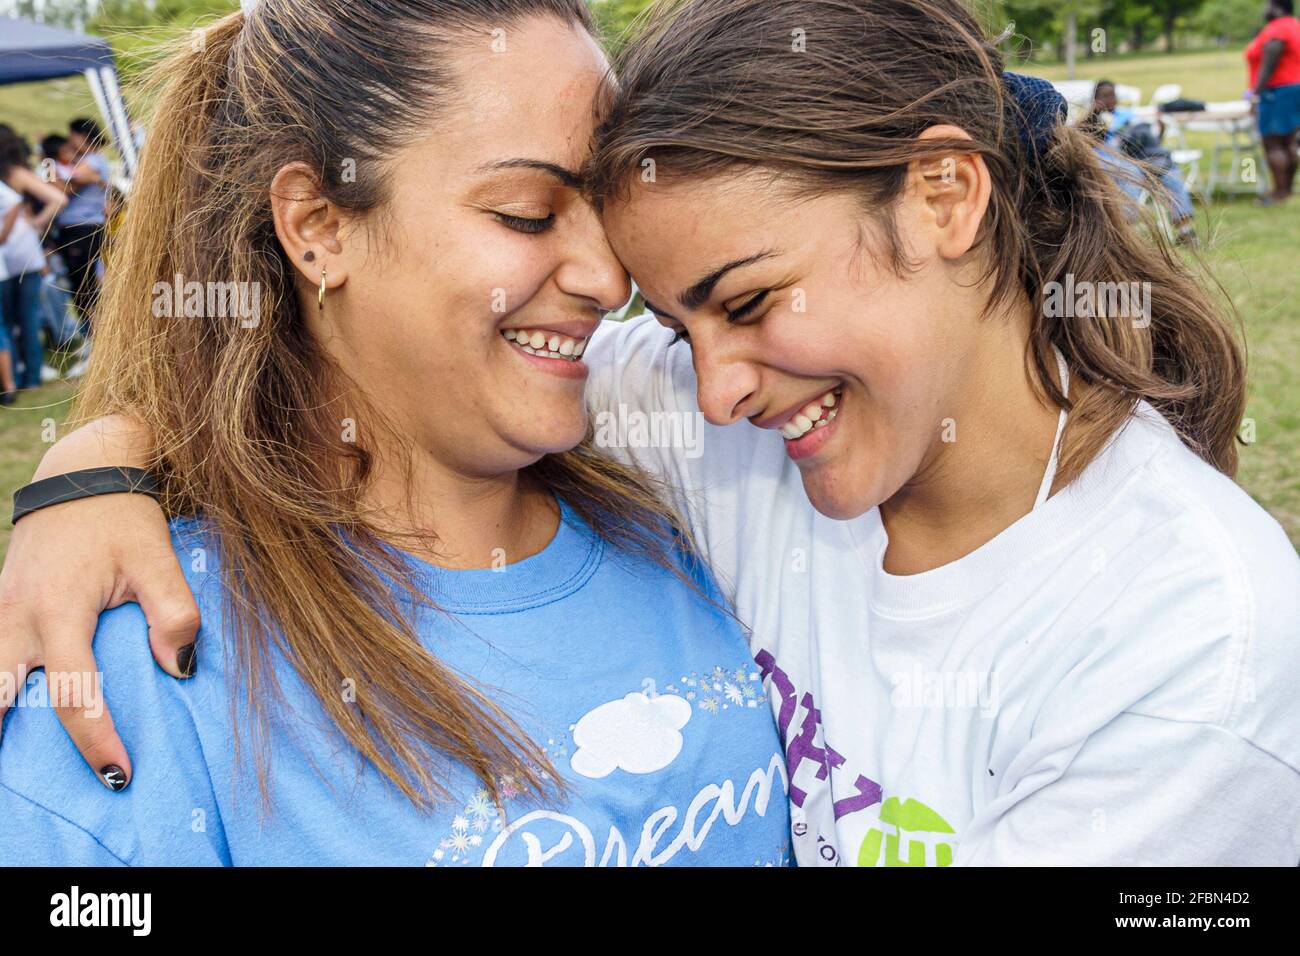 Miami Florida,Tropical Park Drug Free Youth In Town picnic,Hispanic mother parent daughter girl hugging smiling family Stock Photo